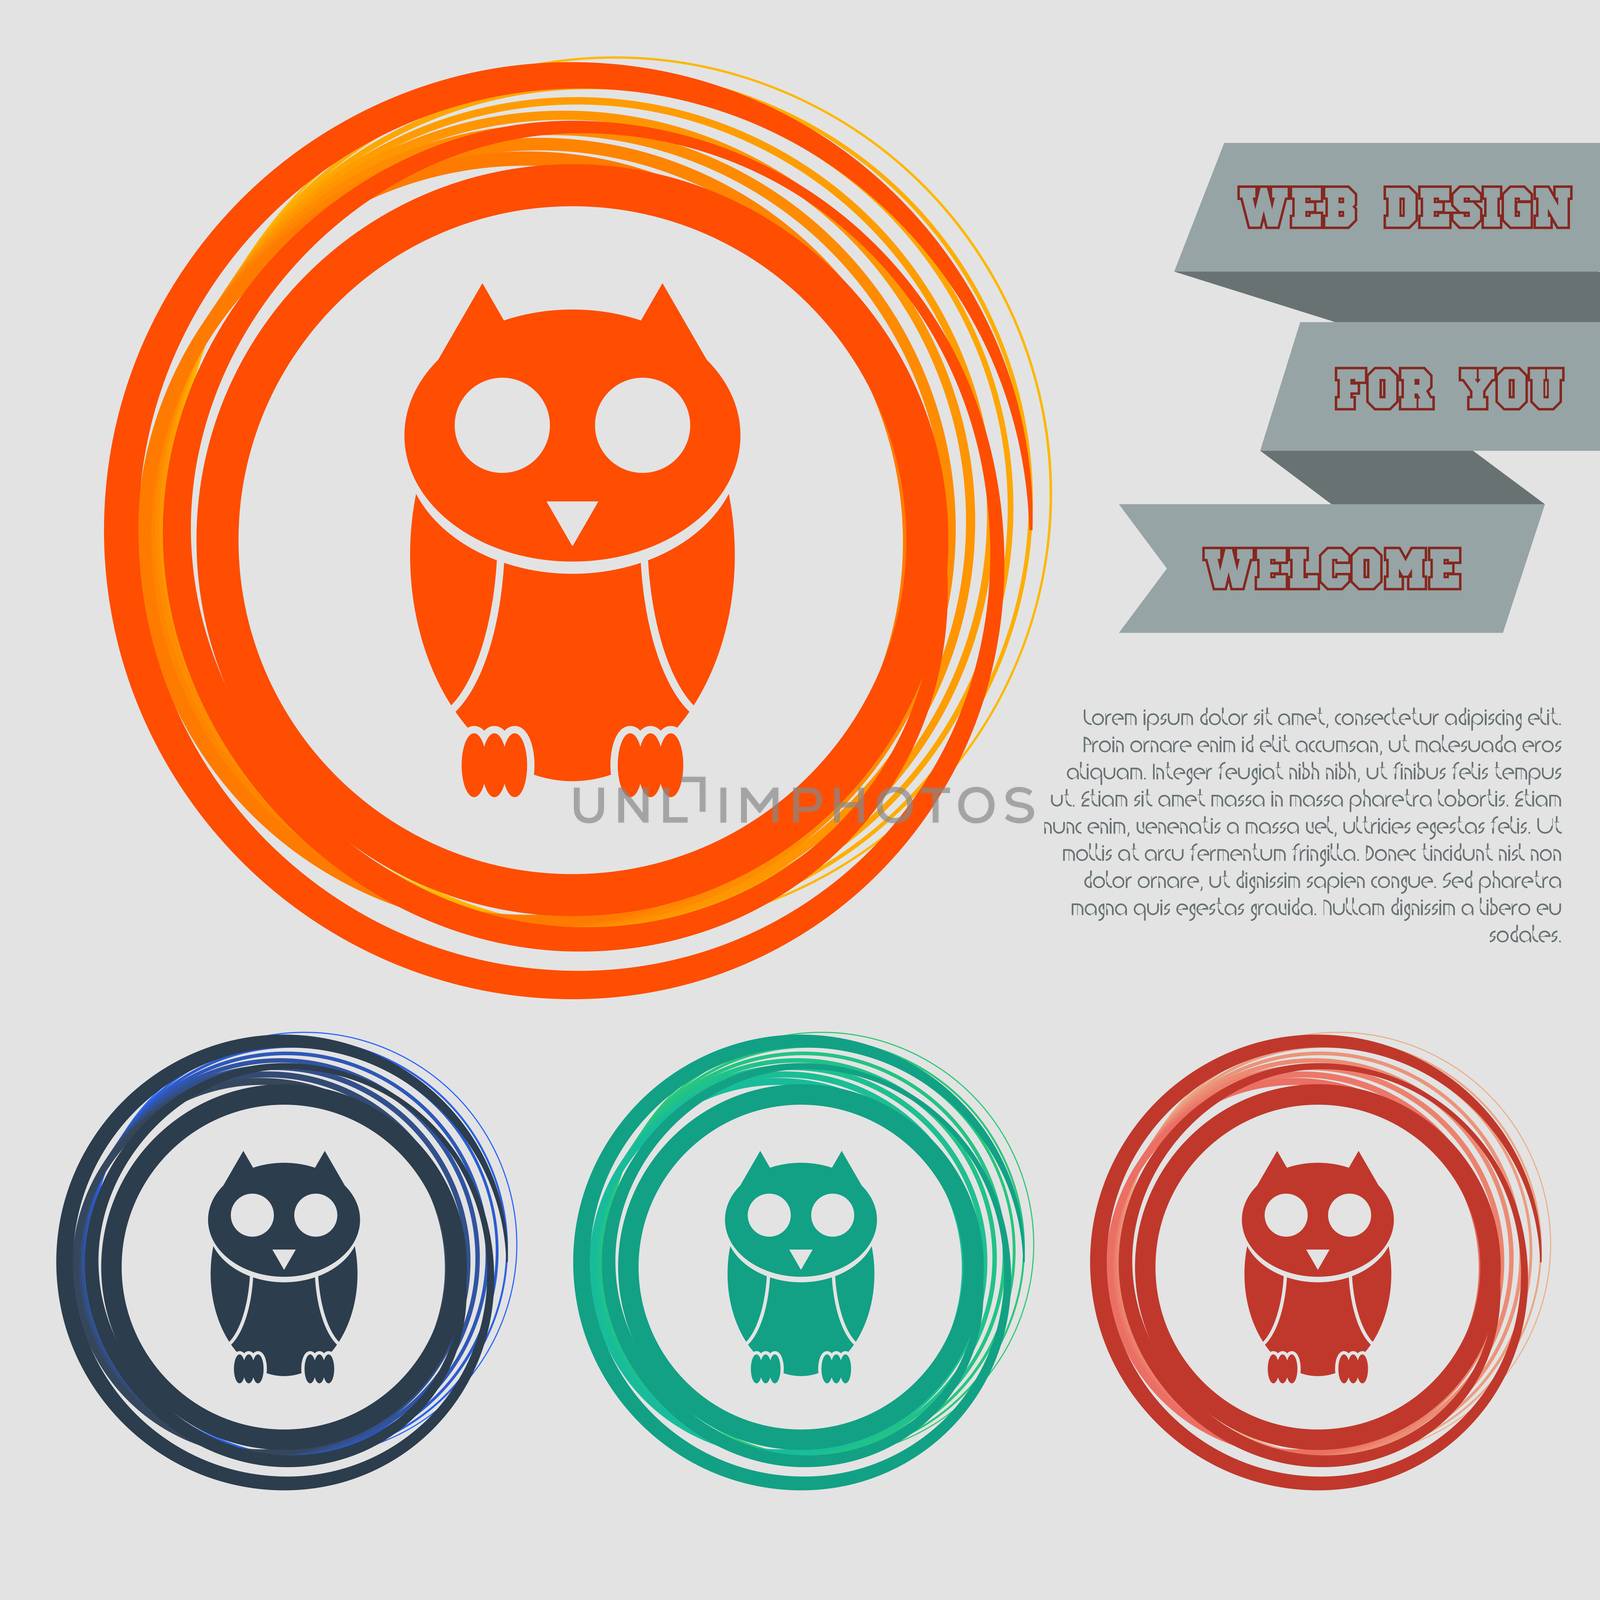 Cute owl cartoon character icon on the red, blue, green, orange buttons for your website and design with space text.  by Adamchuk